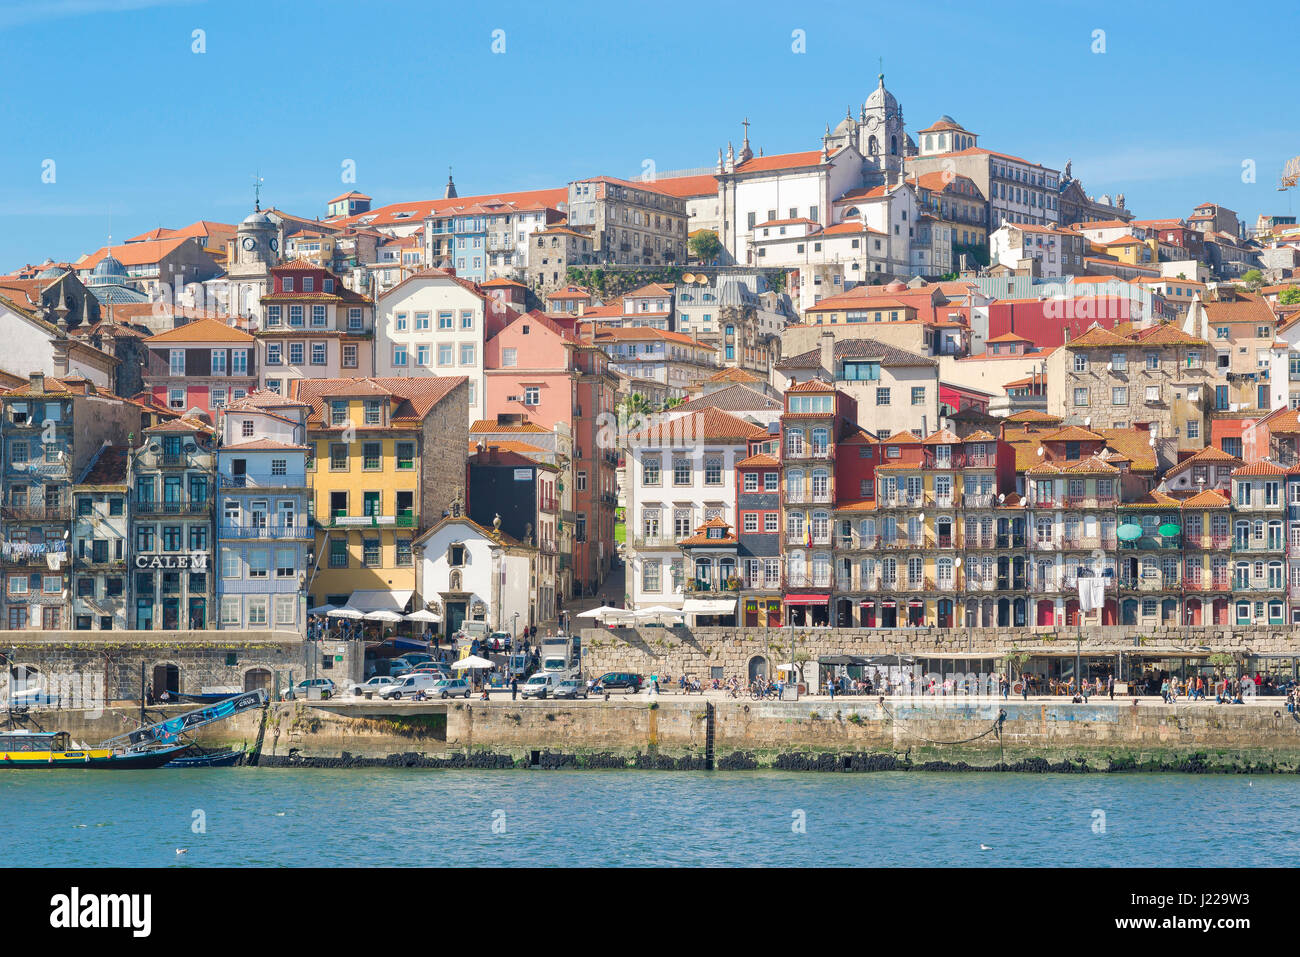 Porto Portugal cityscape, view of the old town Ribeira district's densely packed historic buildings rising above the Douro river in Porto, Europe. Stock Photo